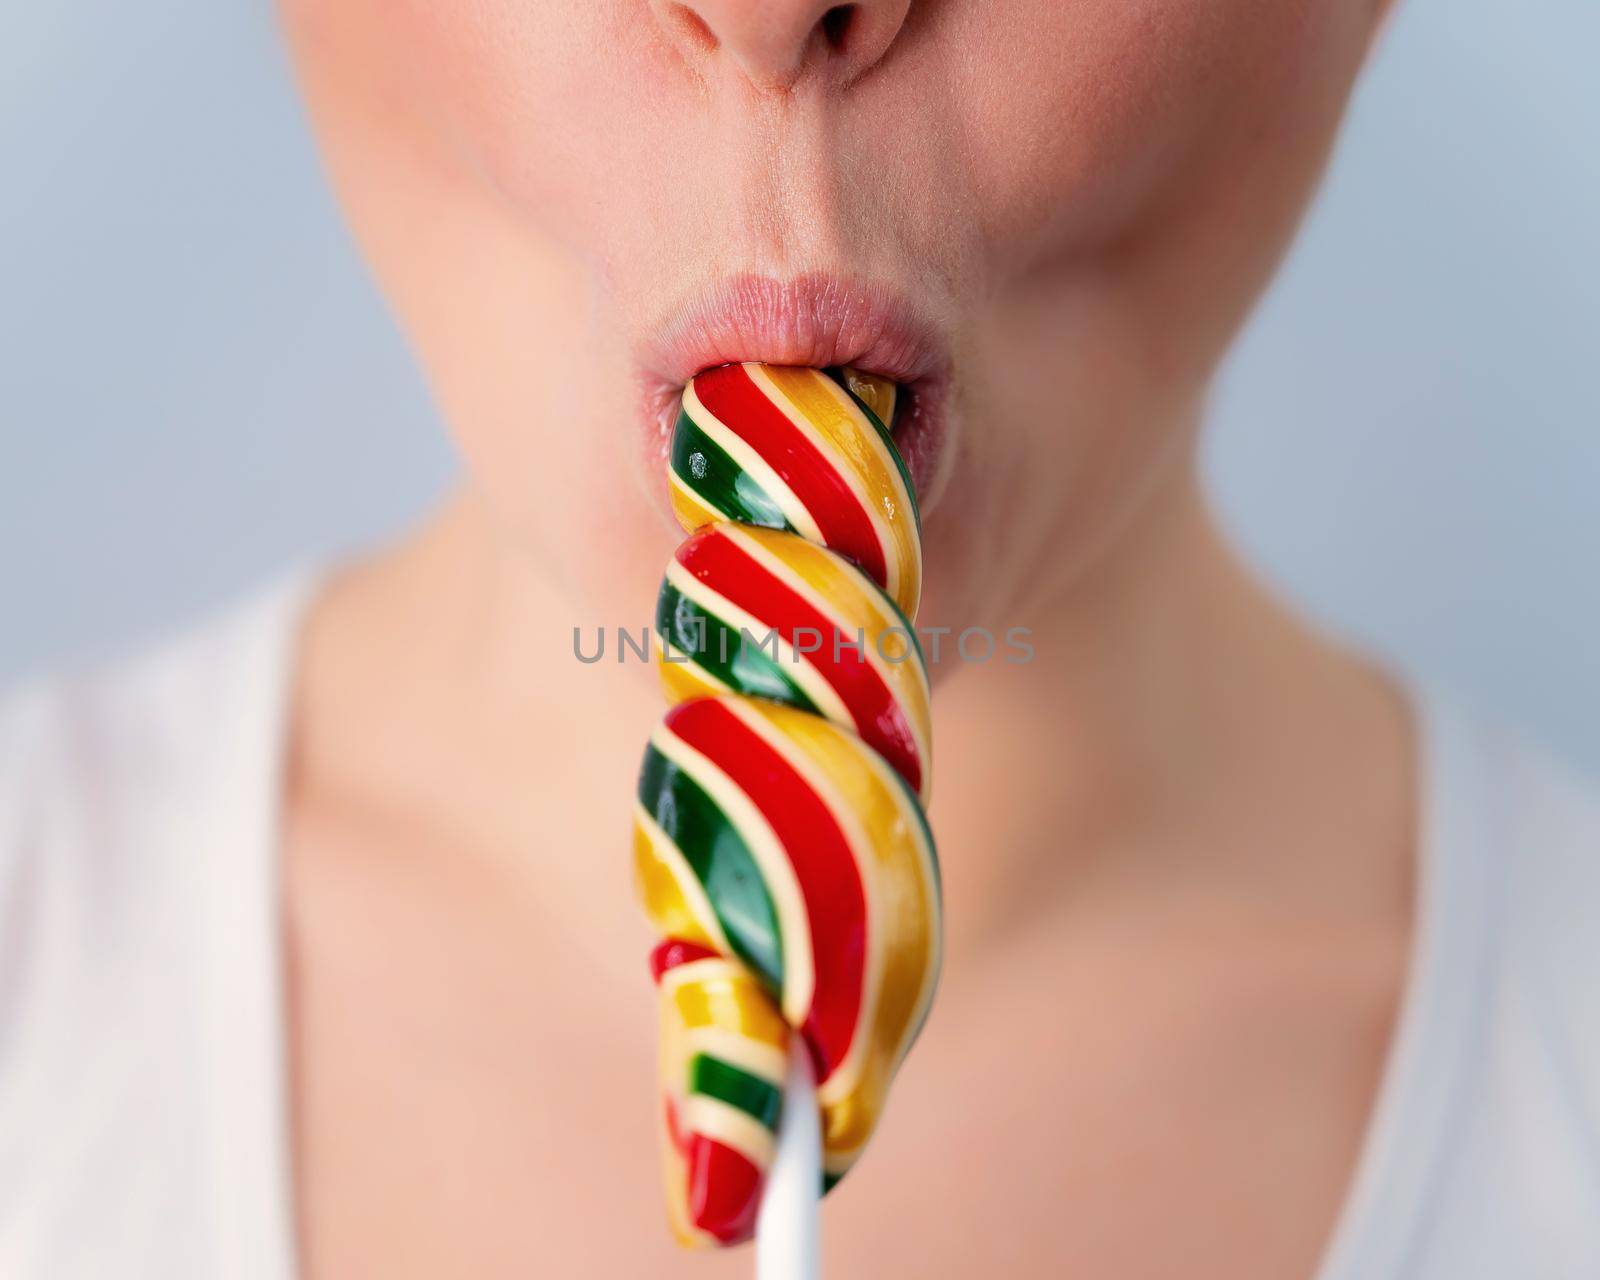 Close-up portrait of a woman sucking a long lollipop against a white background. Blowjob simulation by mrwed54